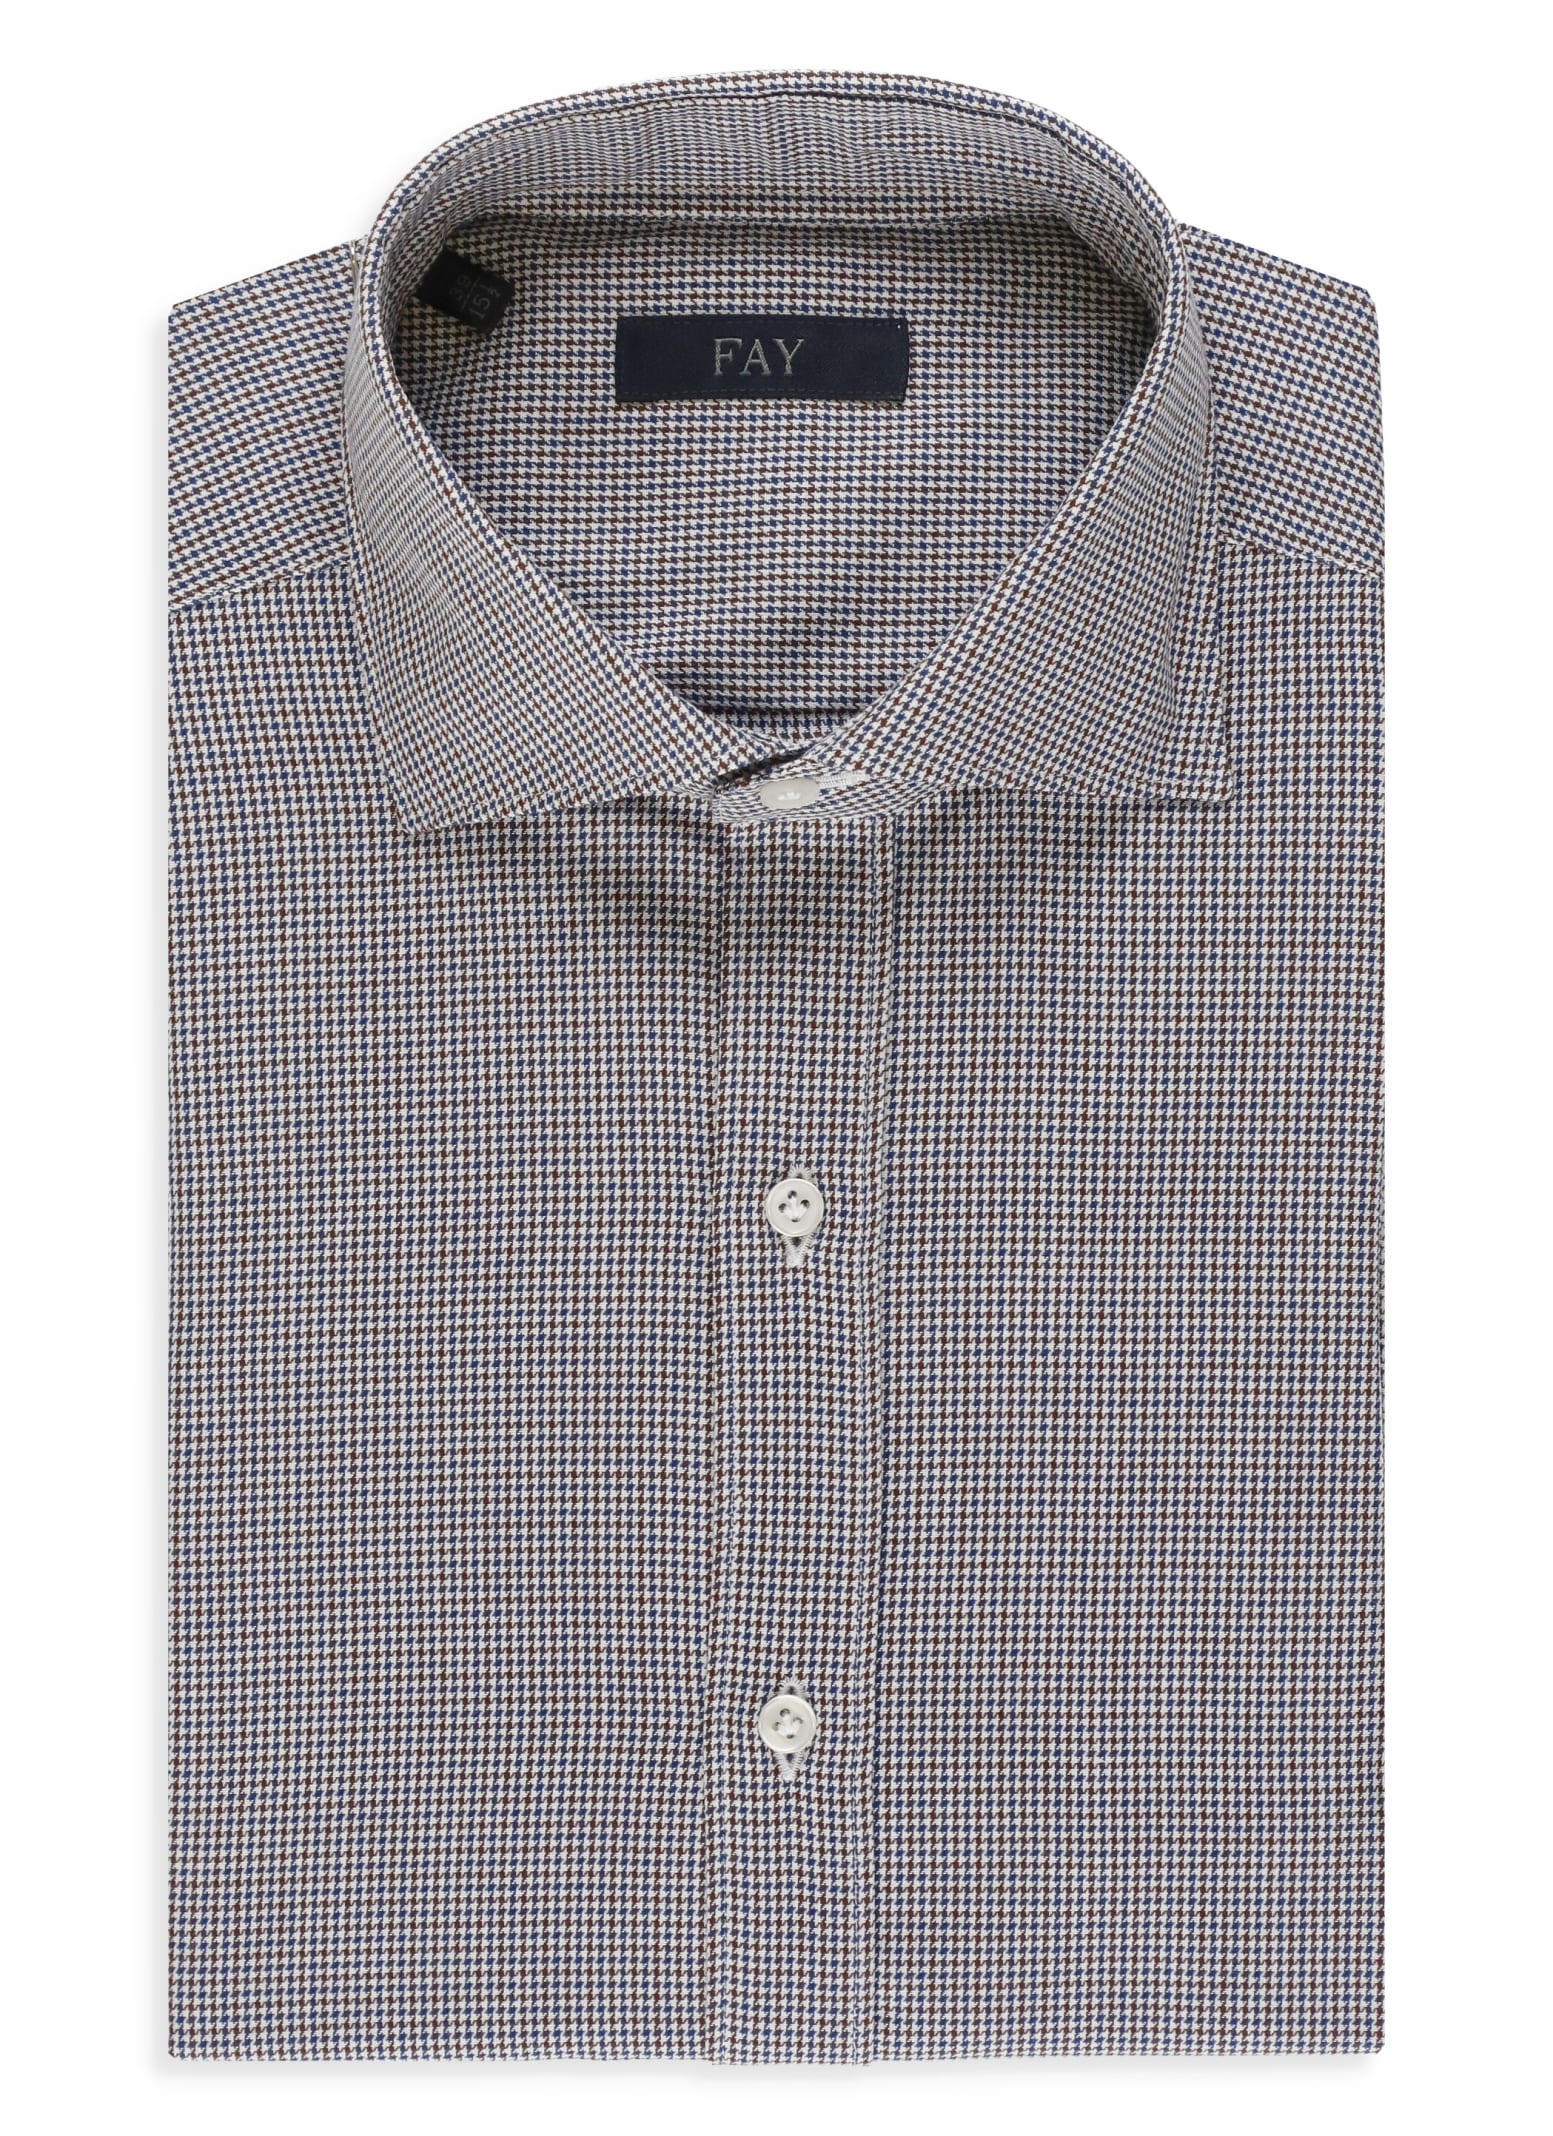 Fay Houndstooth Shirt